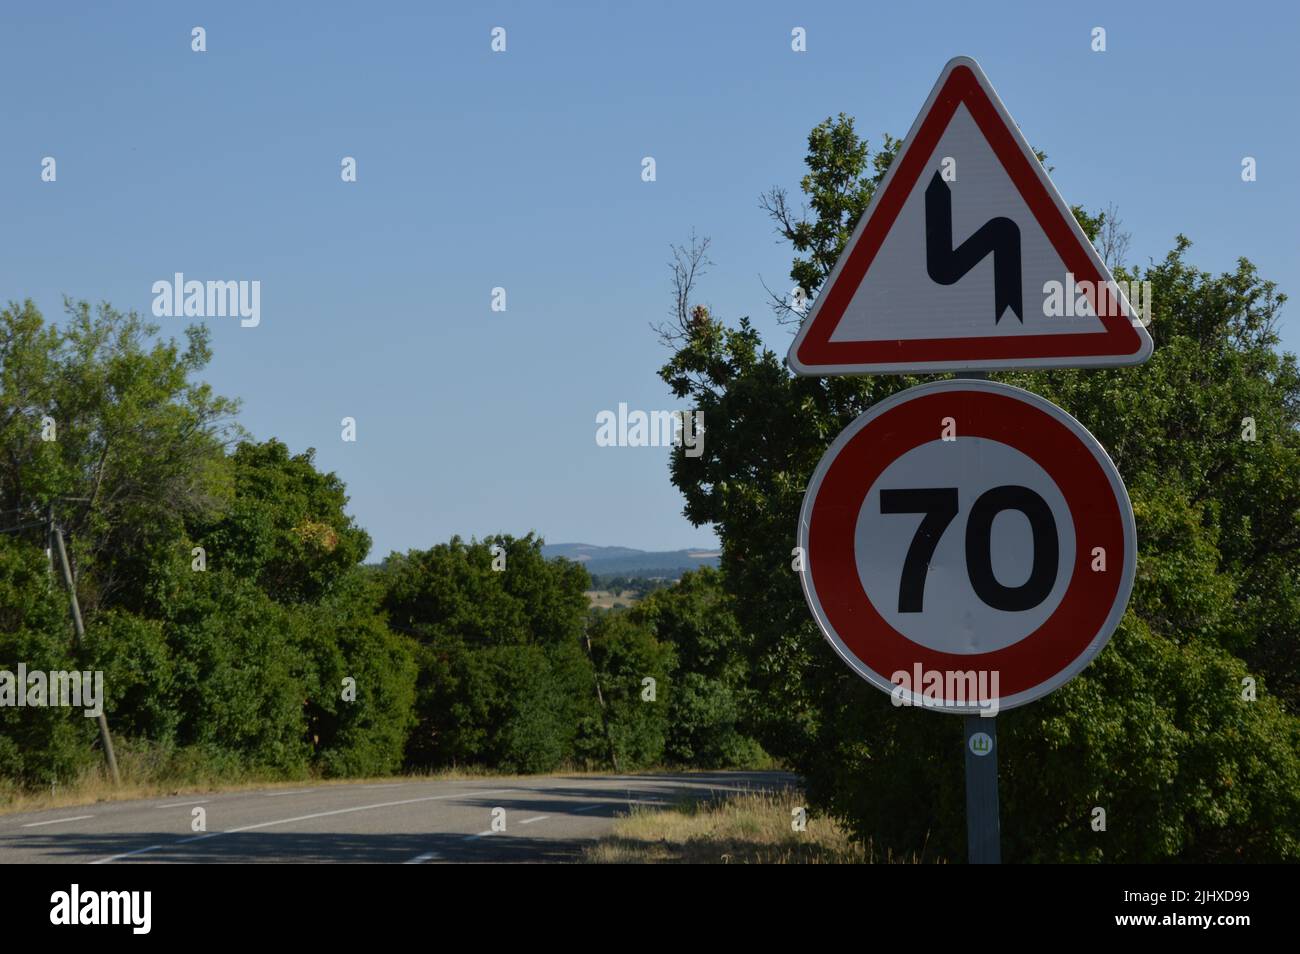 Speed limit sign, road sign from france Stock Photo